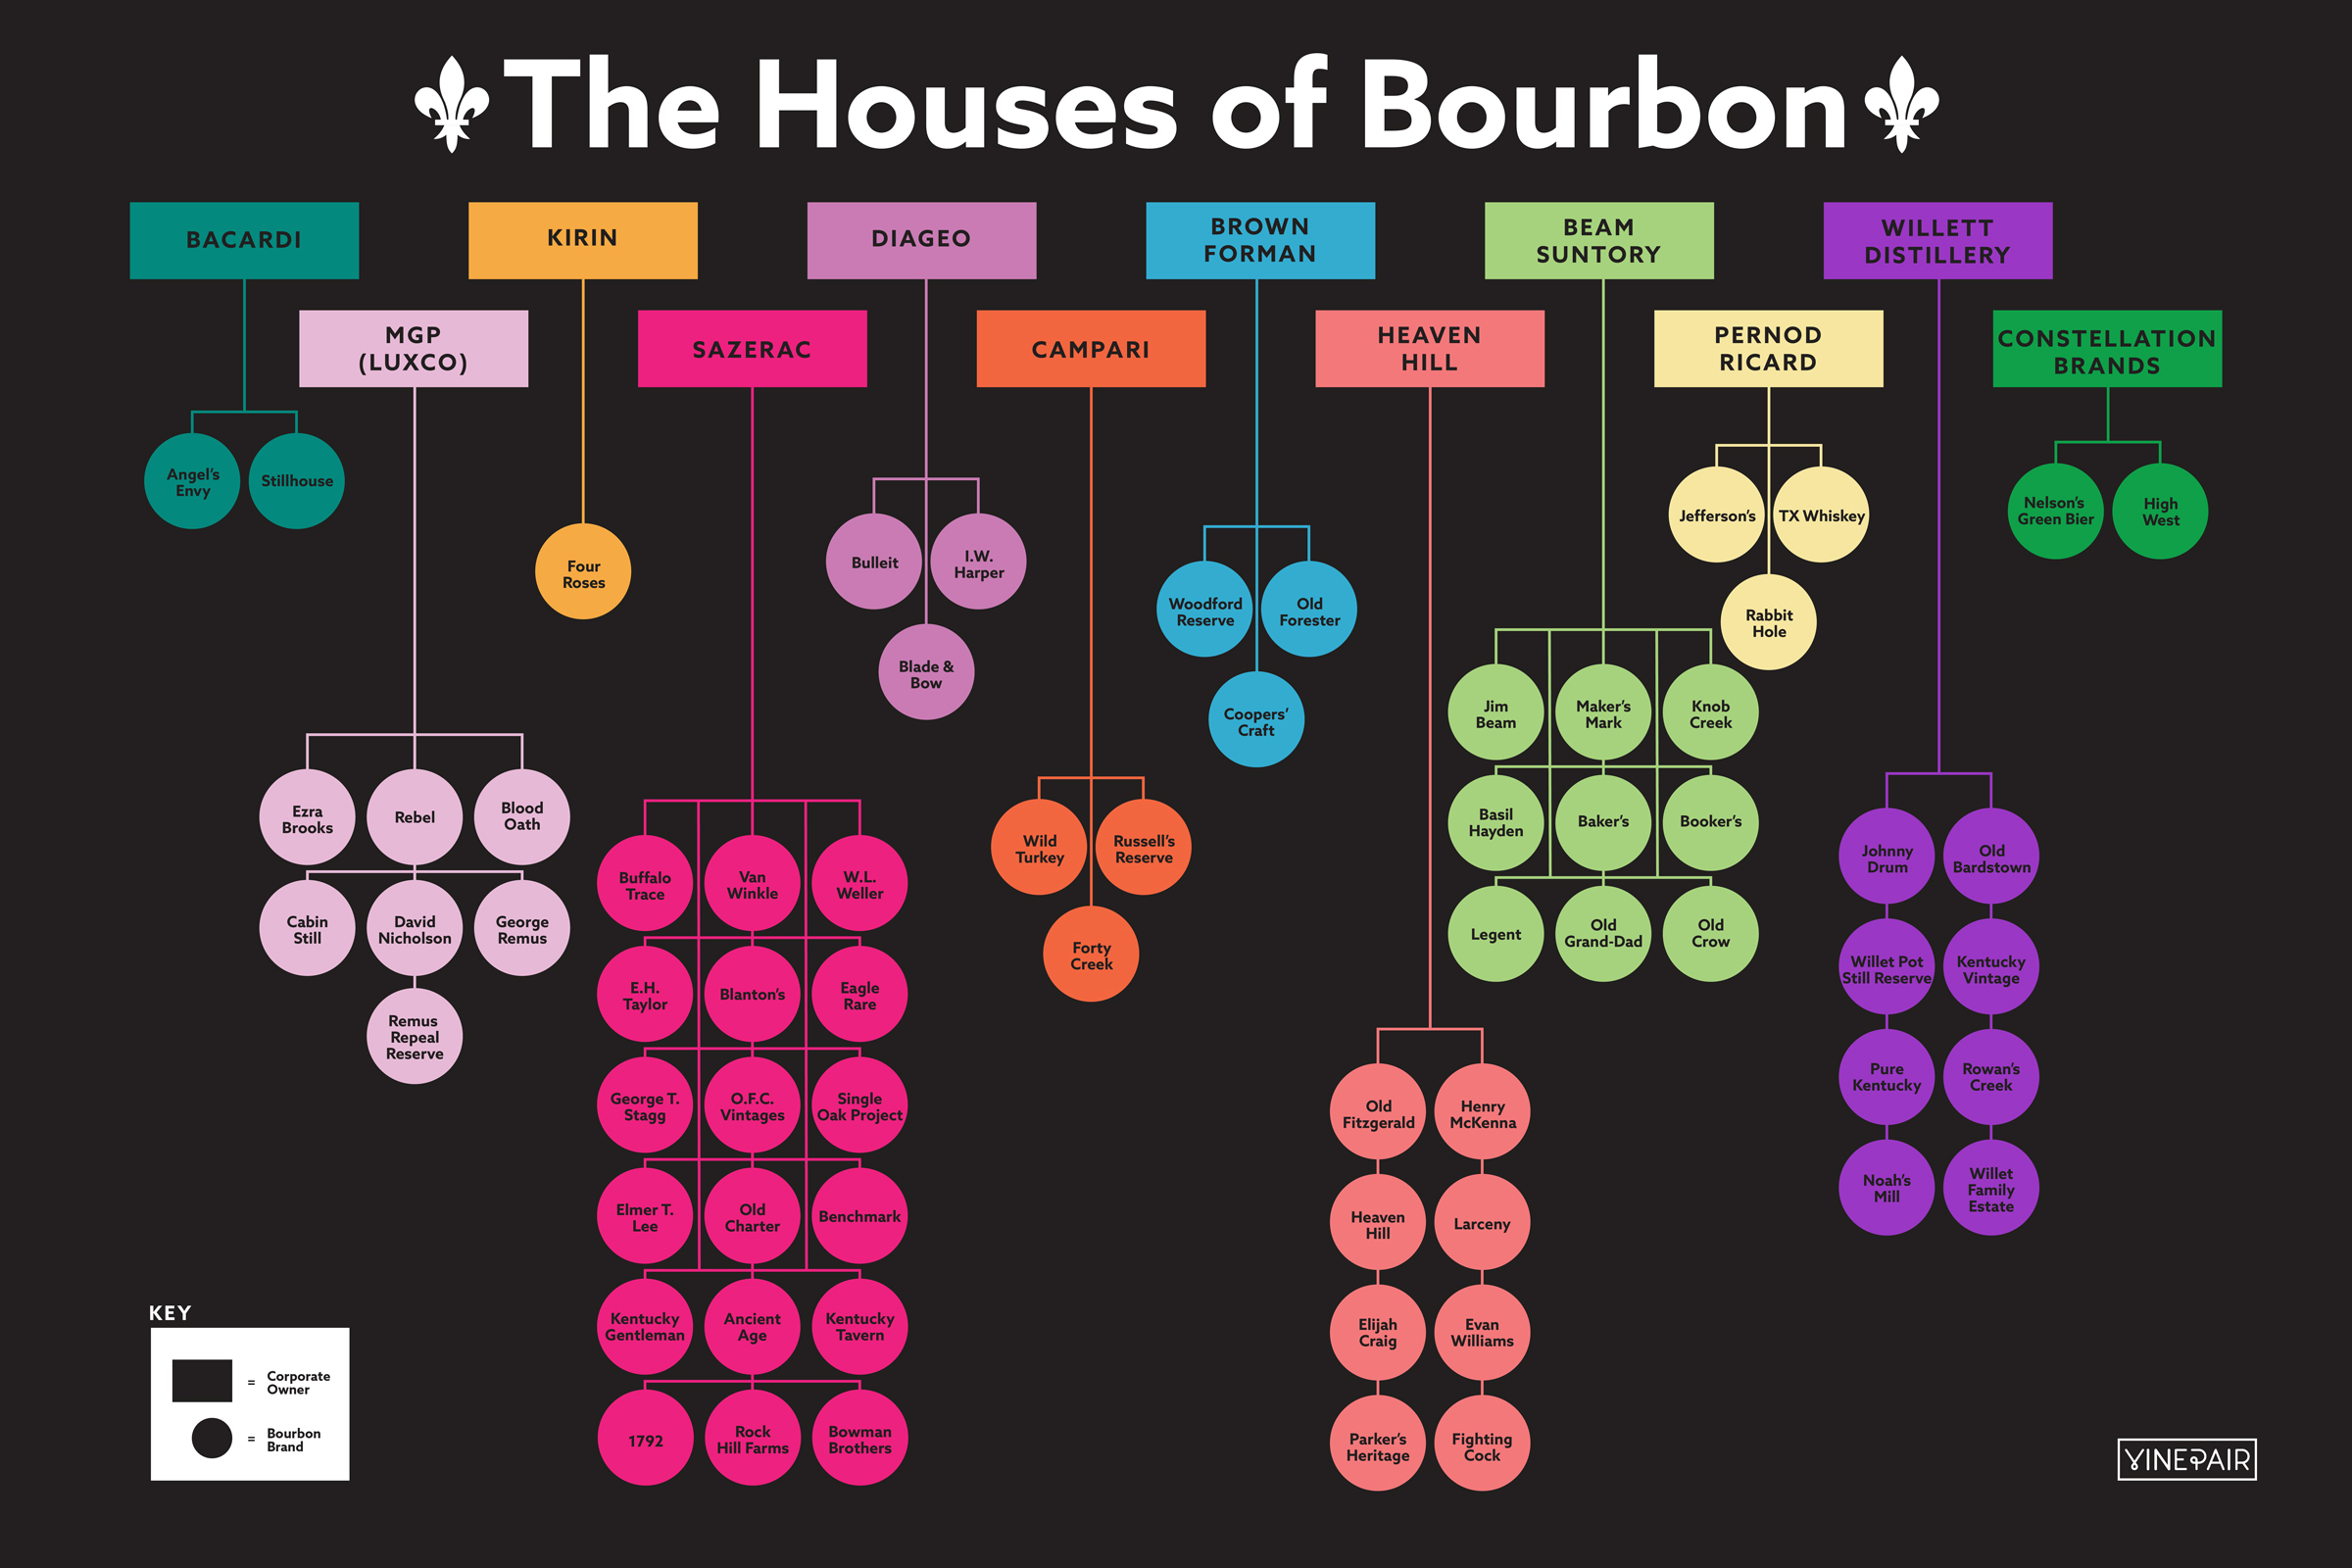 Infographic on the Houses of Bourbon - Image displays the family tree of bourbon brands and the companies that own them.